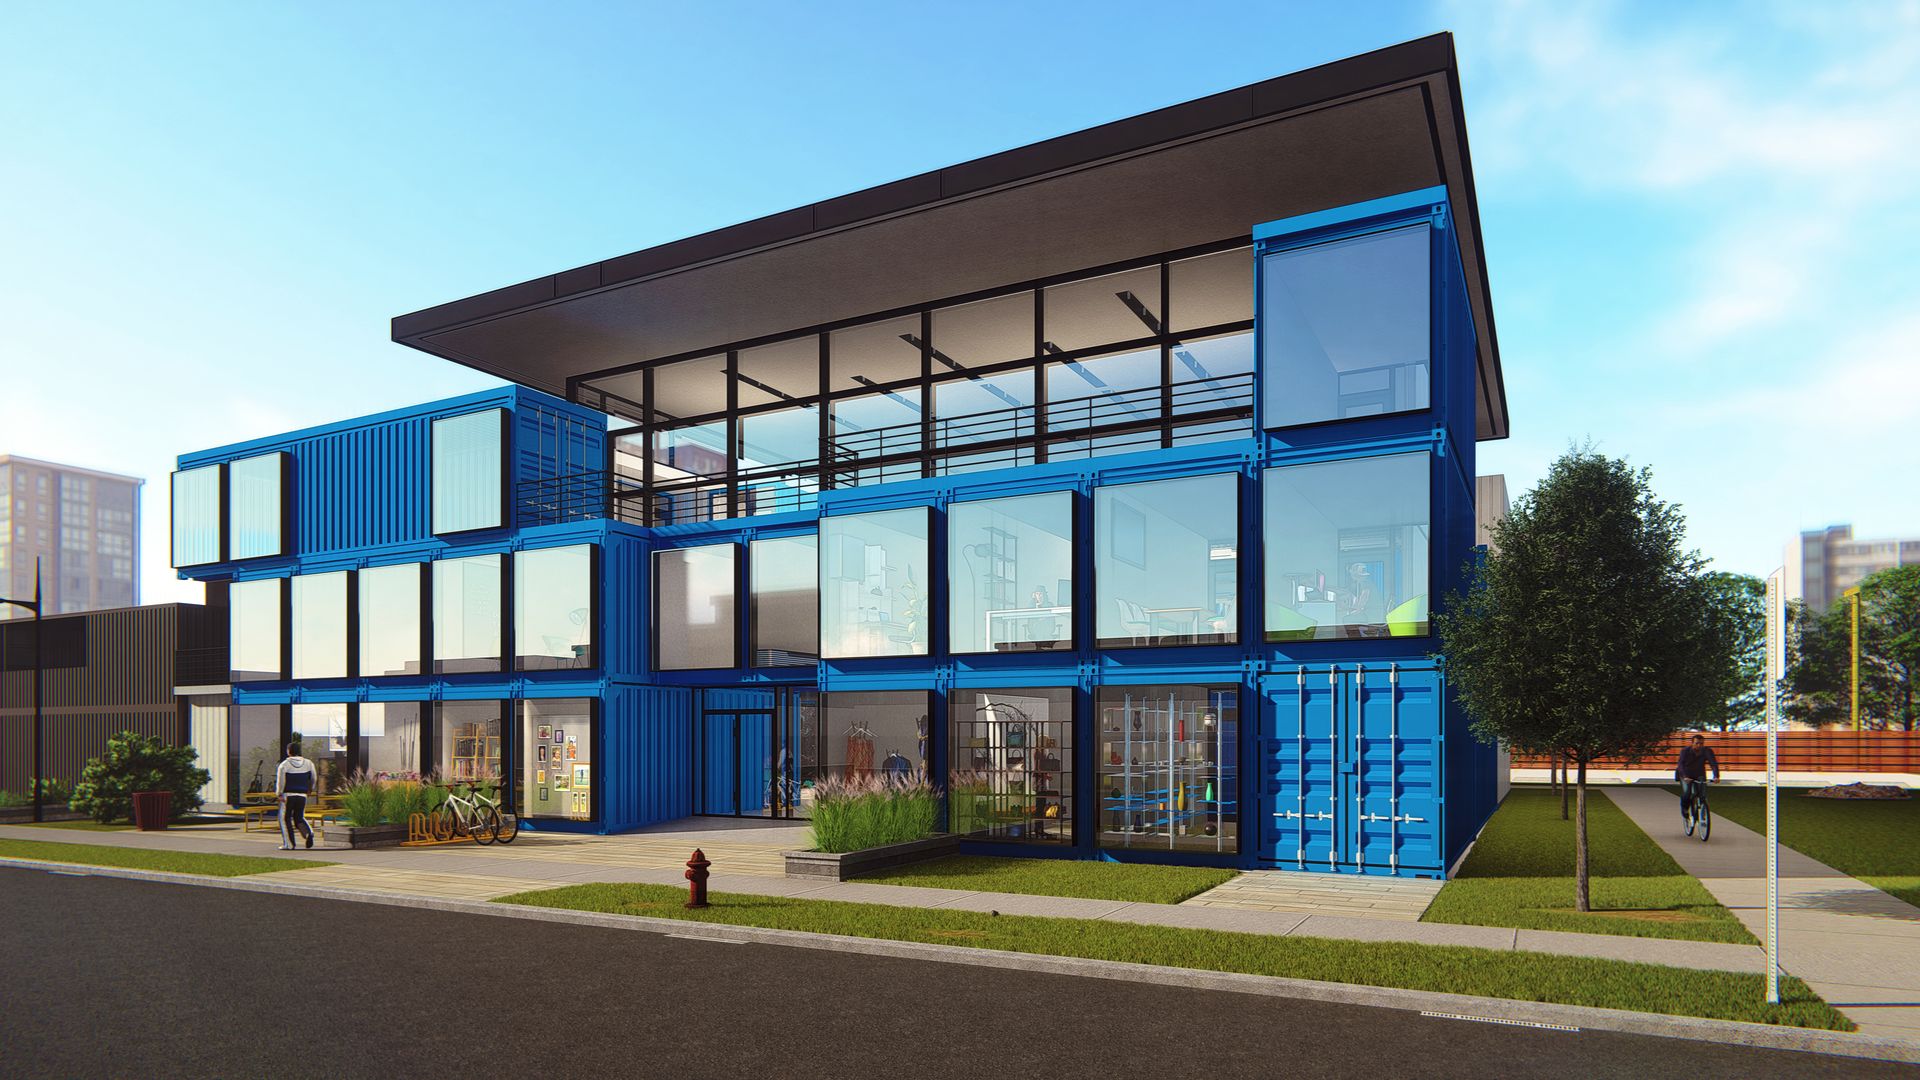 A rendering shows a three-story building made out of blue shipping containers.